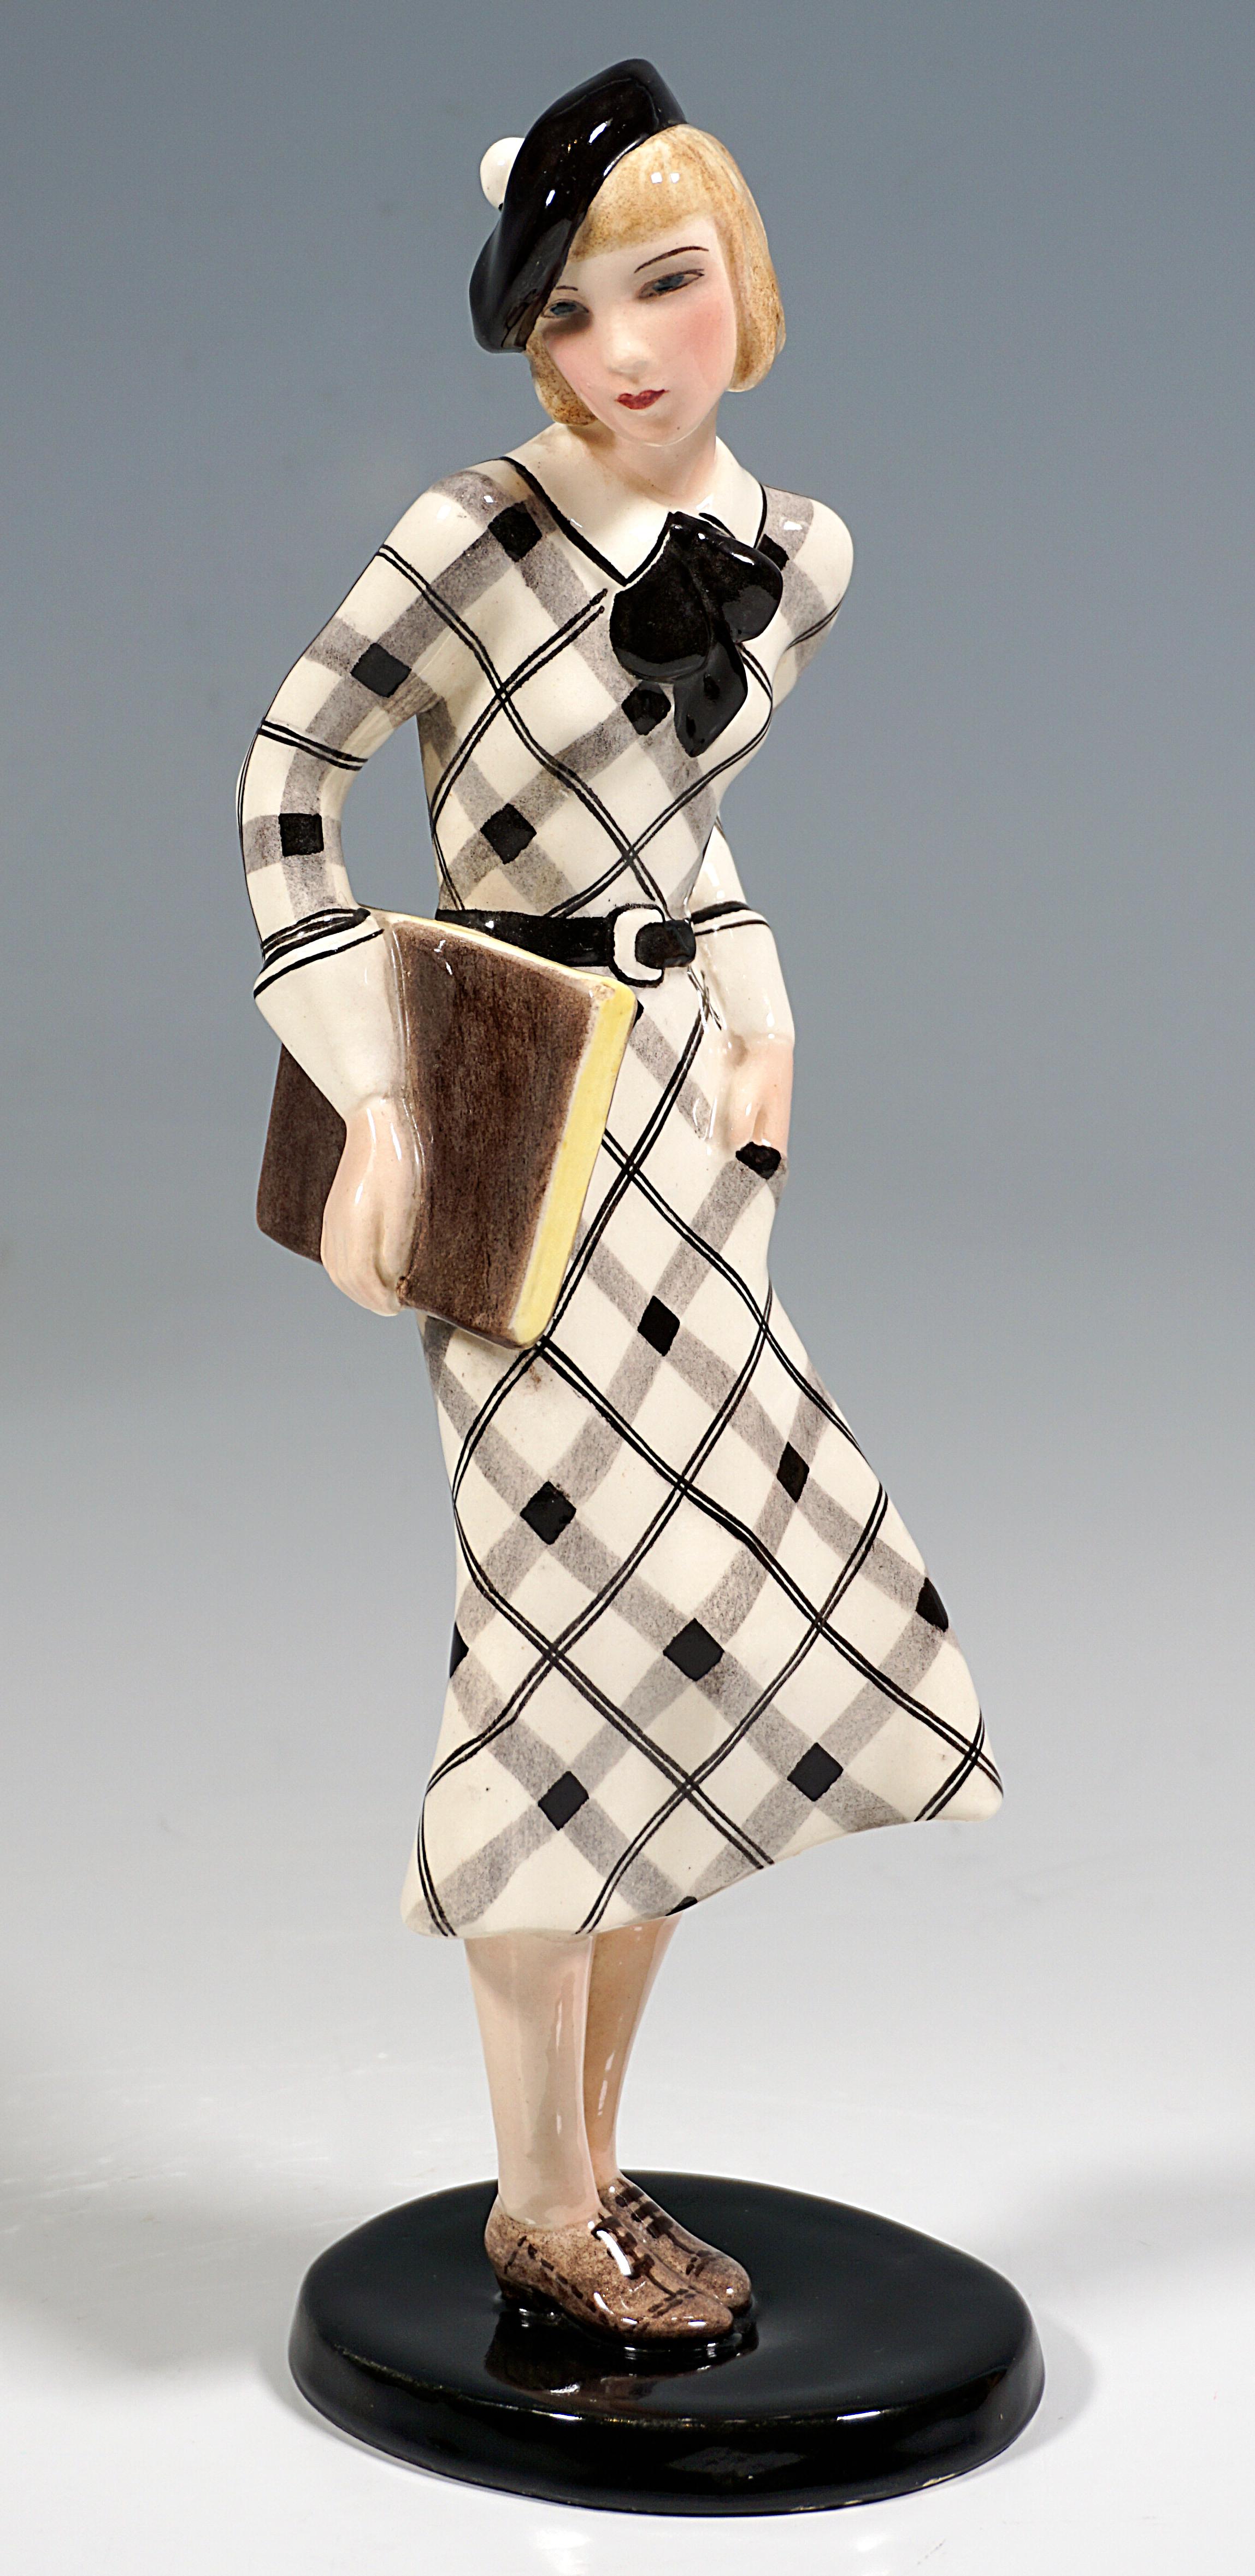 Hand-Crafted Goldscheider Art Déco Figurine, Girl With Beret And Folder, Claire Weiss, c 1935